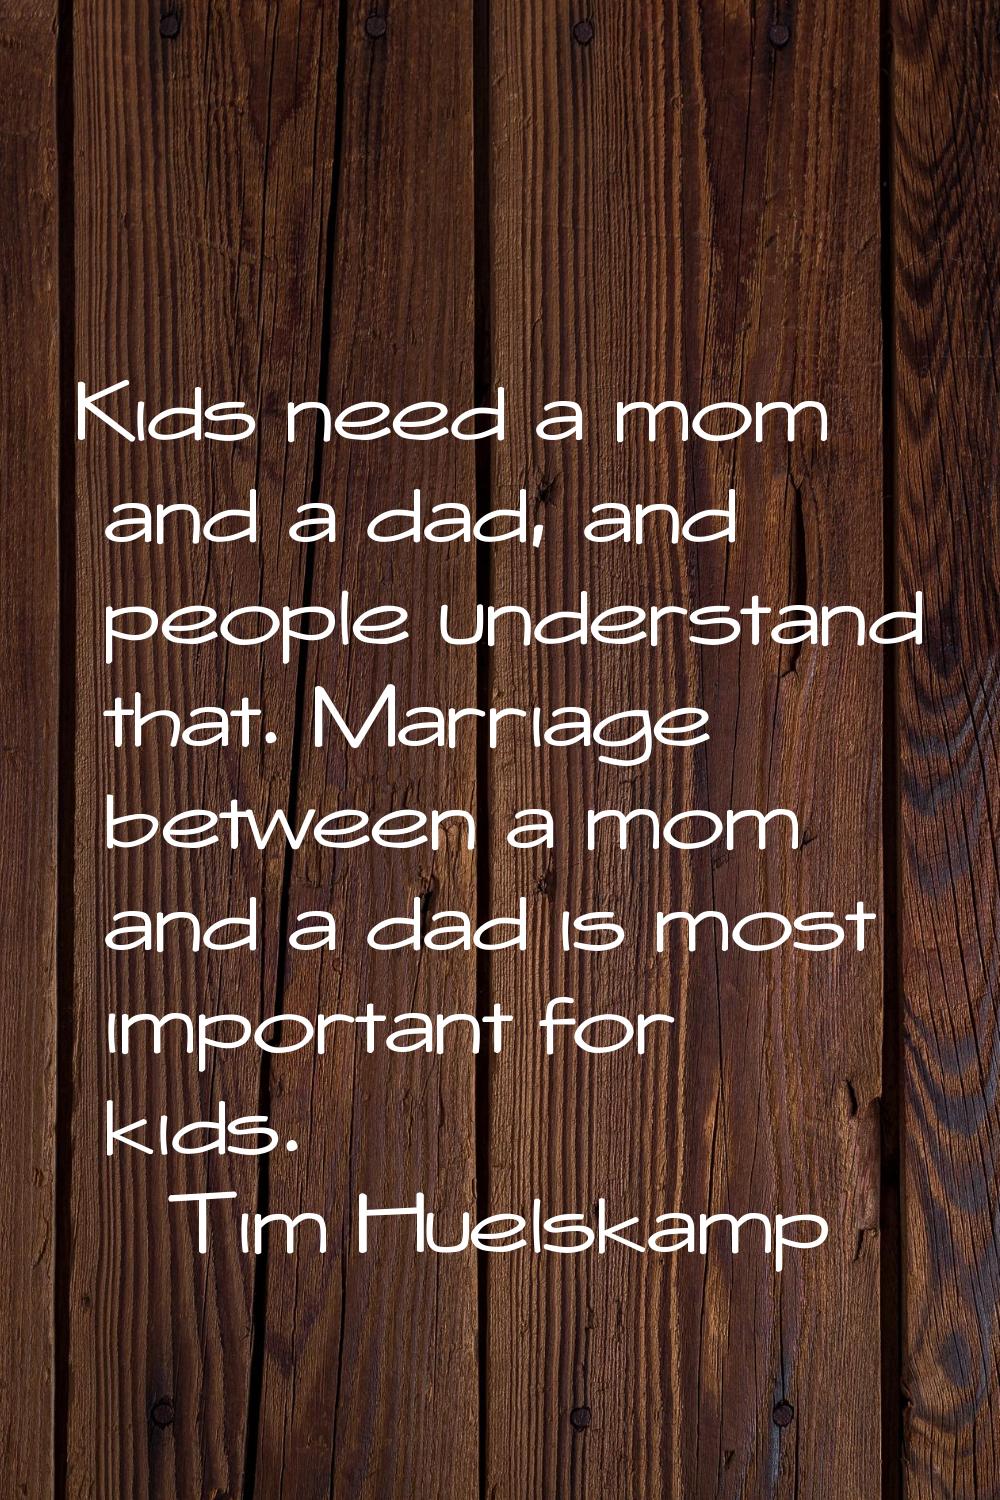 Kids need a mom and a dad, and people understand that. Marriage between a mom and a dad is most imp